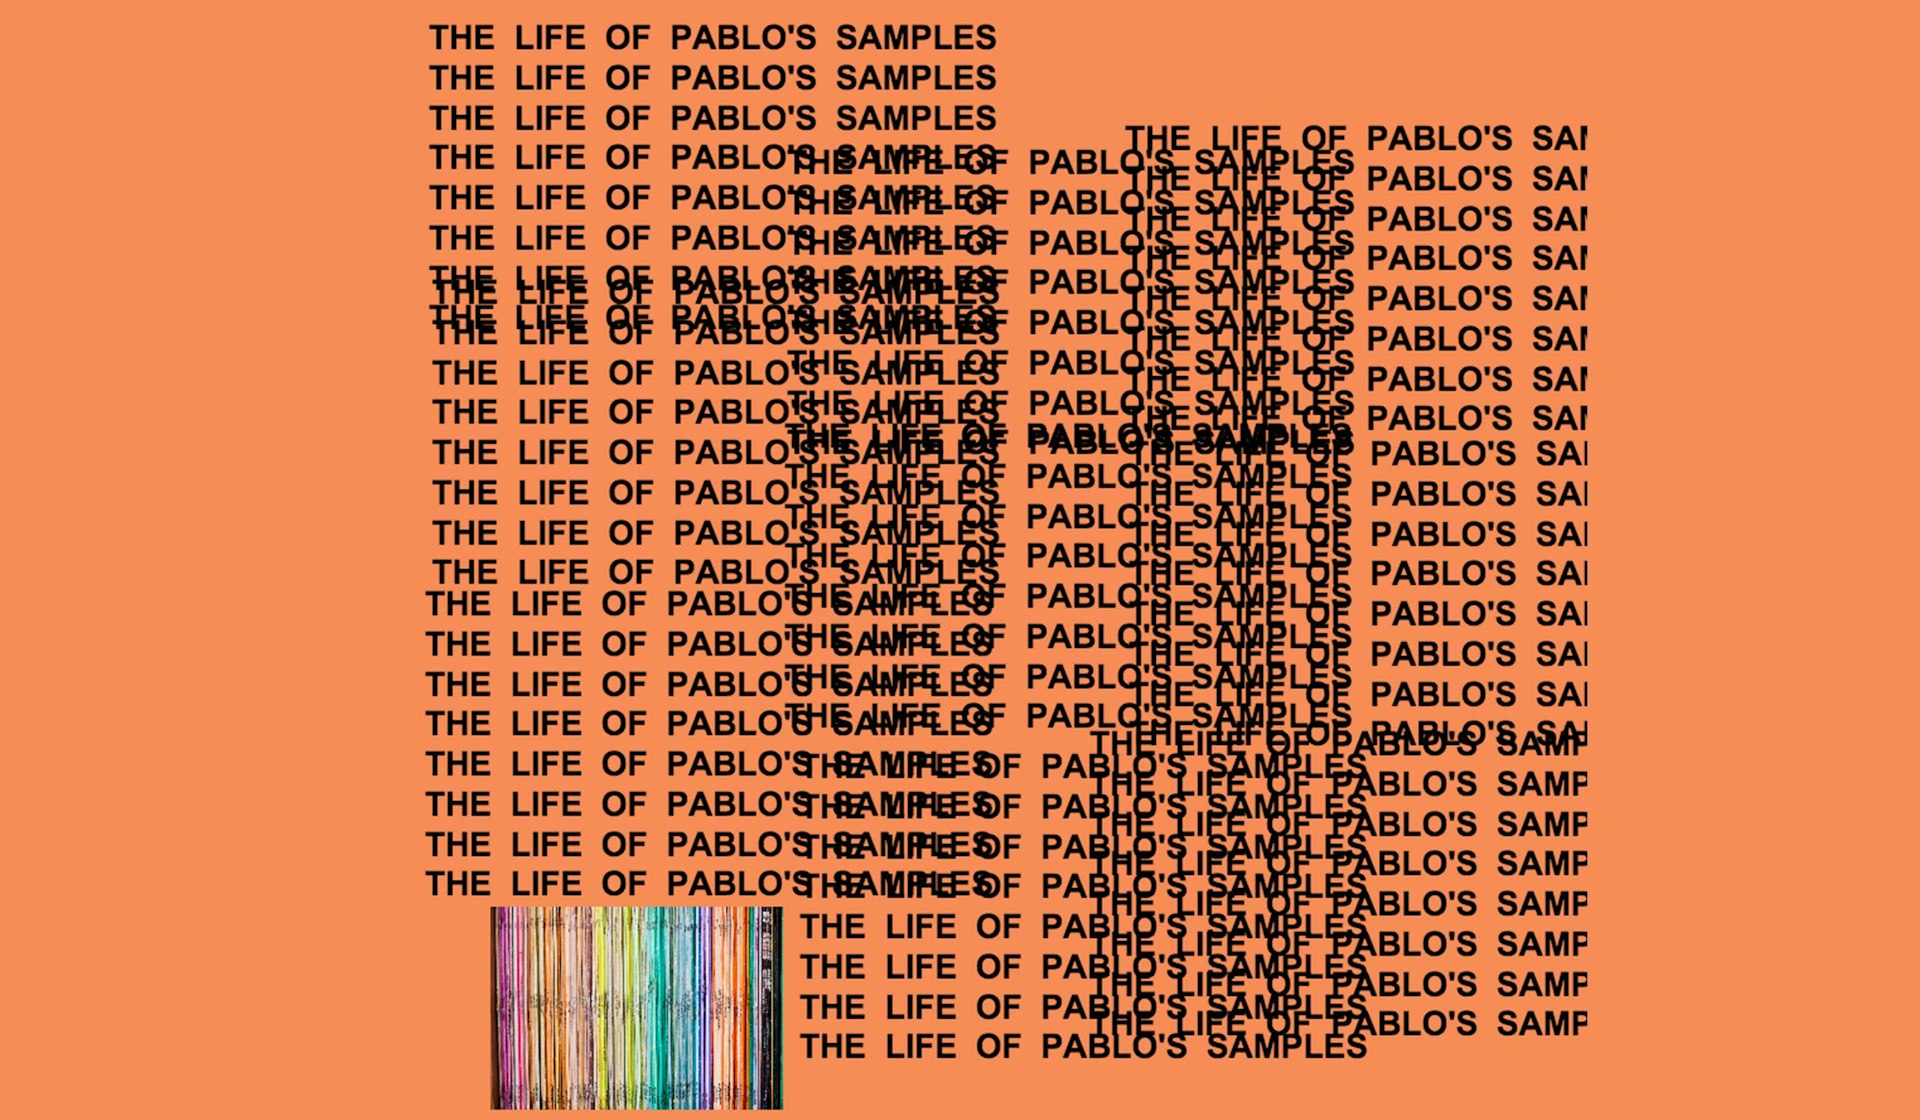 Six surprising sounds behind Kanye West’s The Life of Pablo